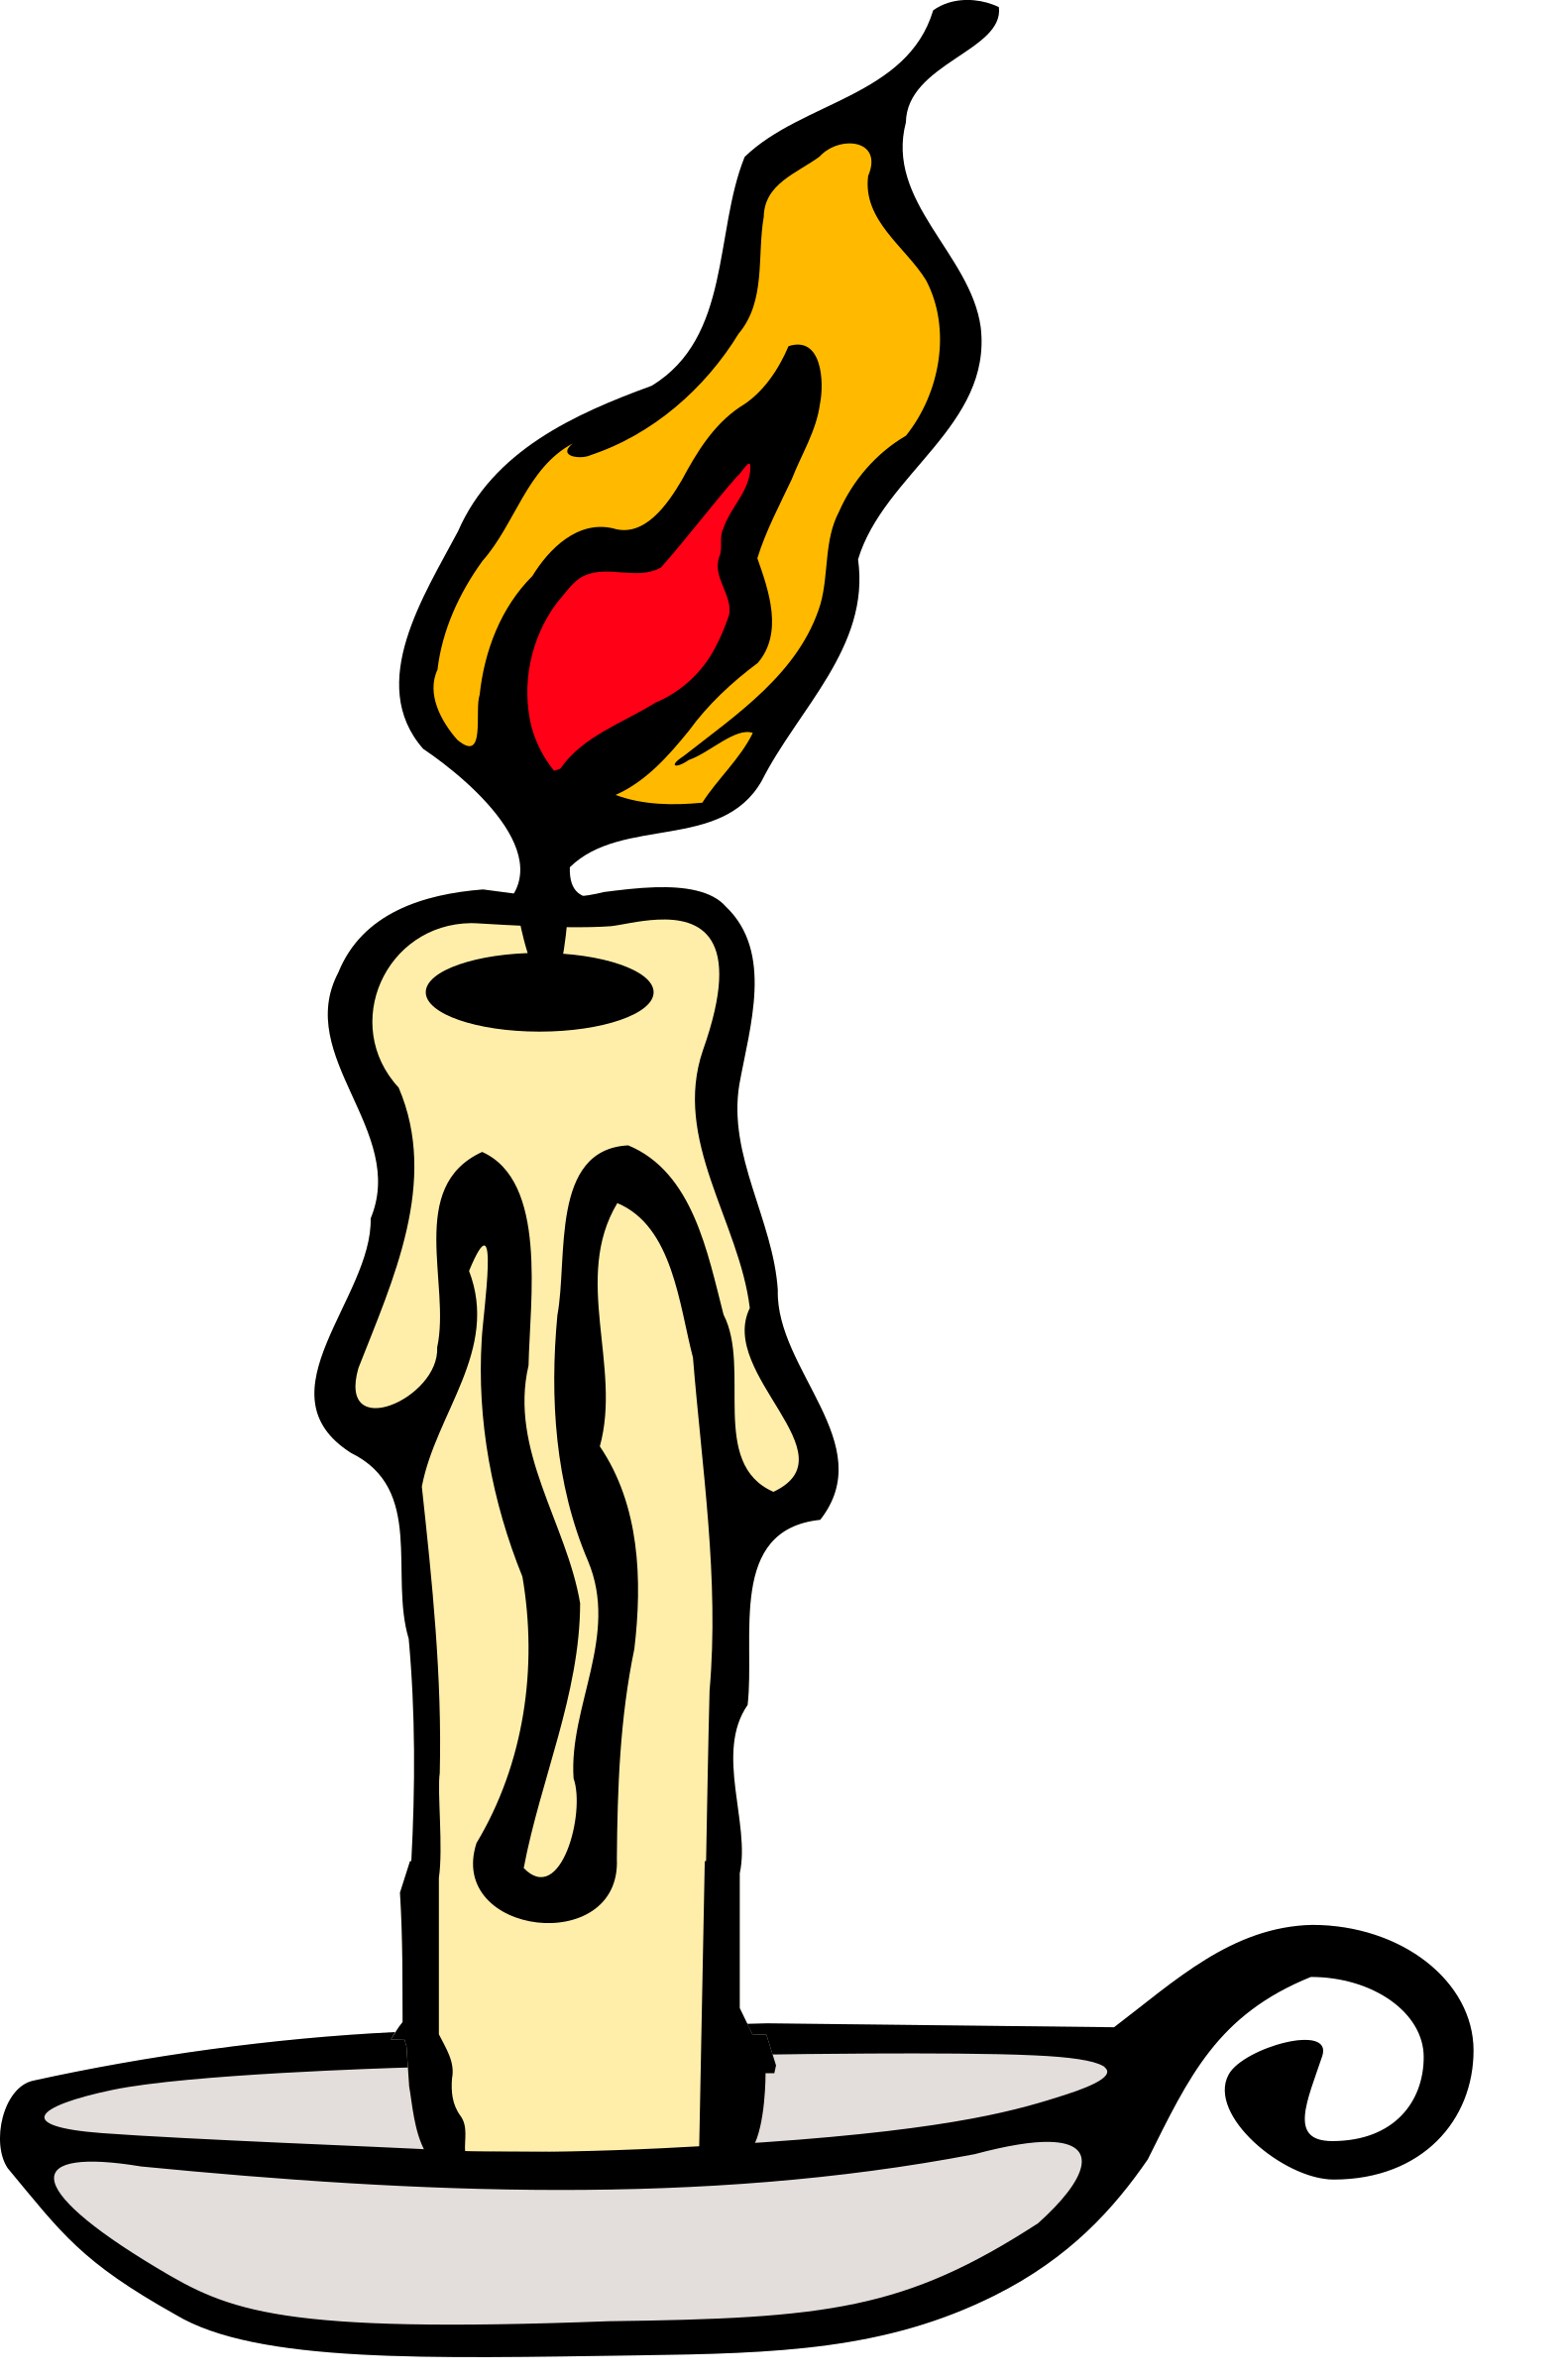 Injury clipart chemical burn.  collection of high